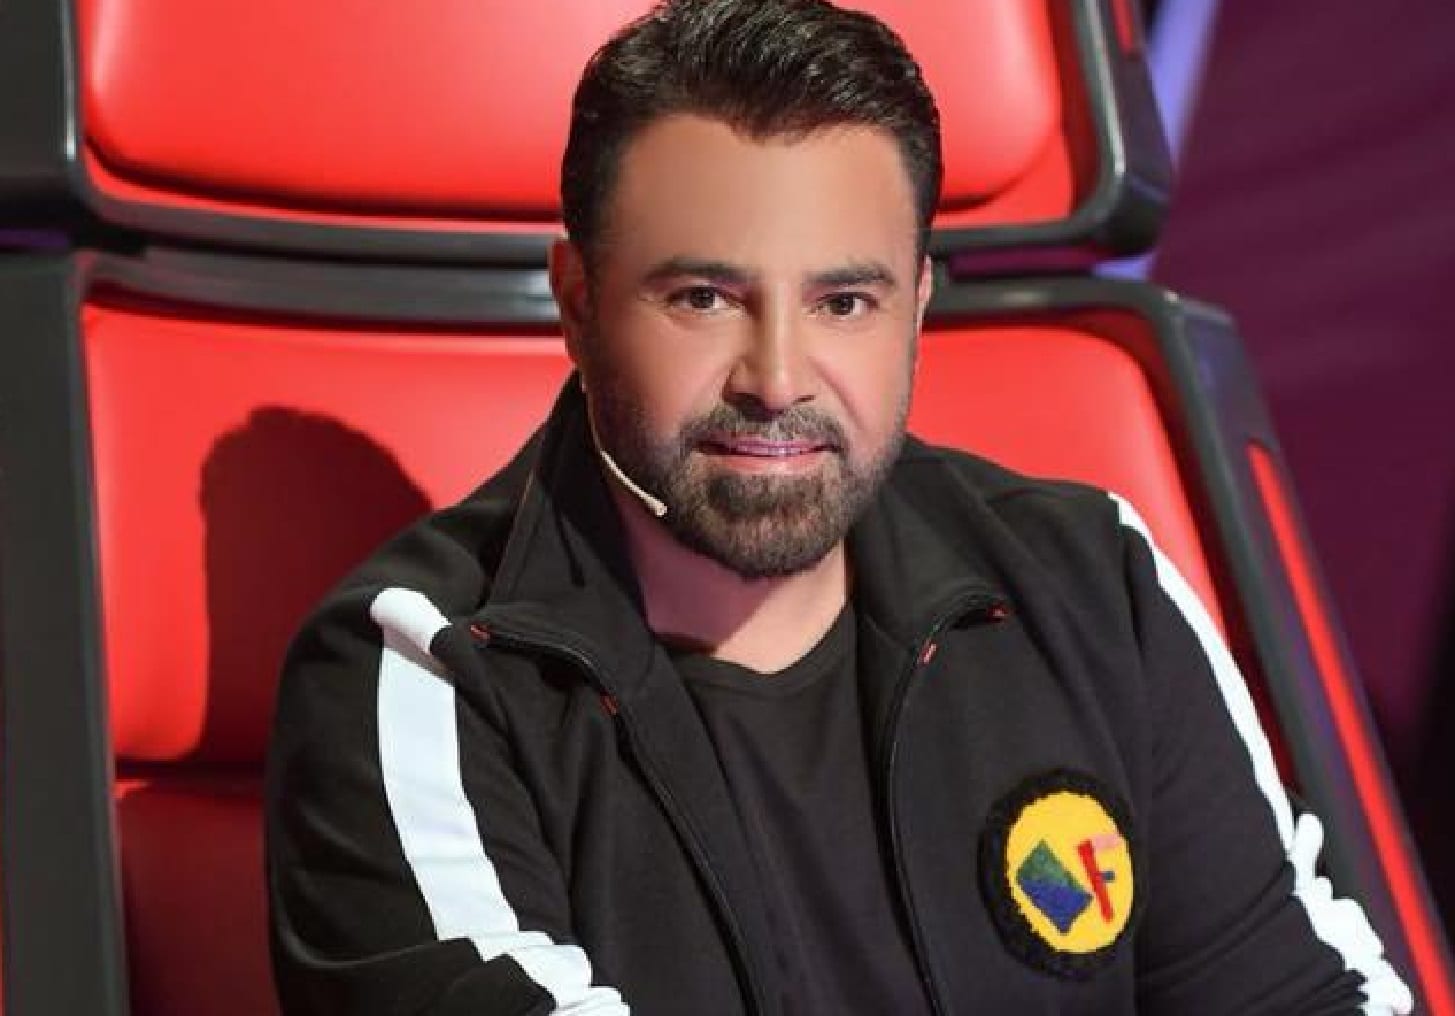 ASSI THE VOICE1